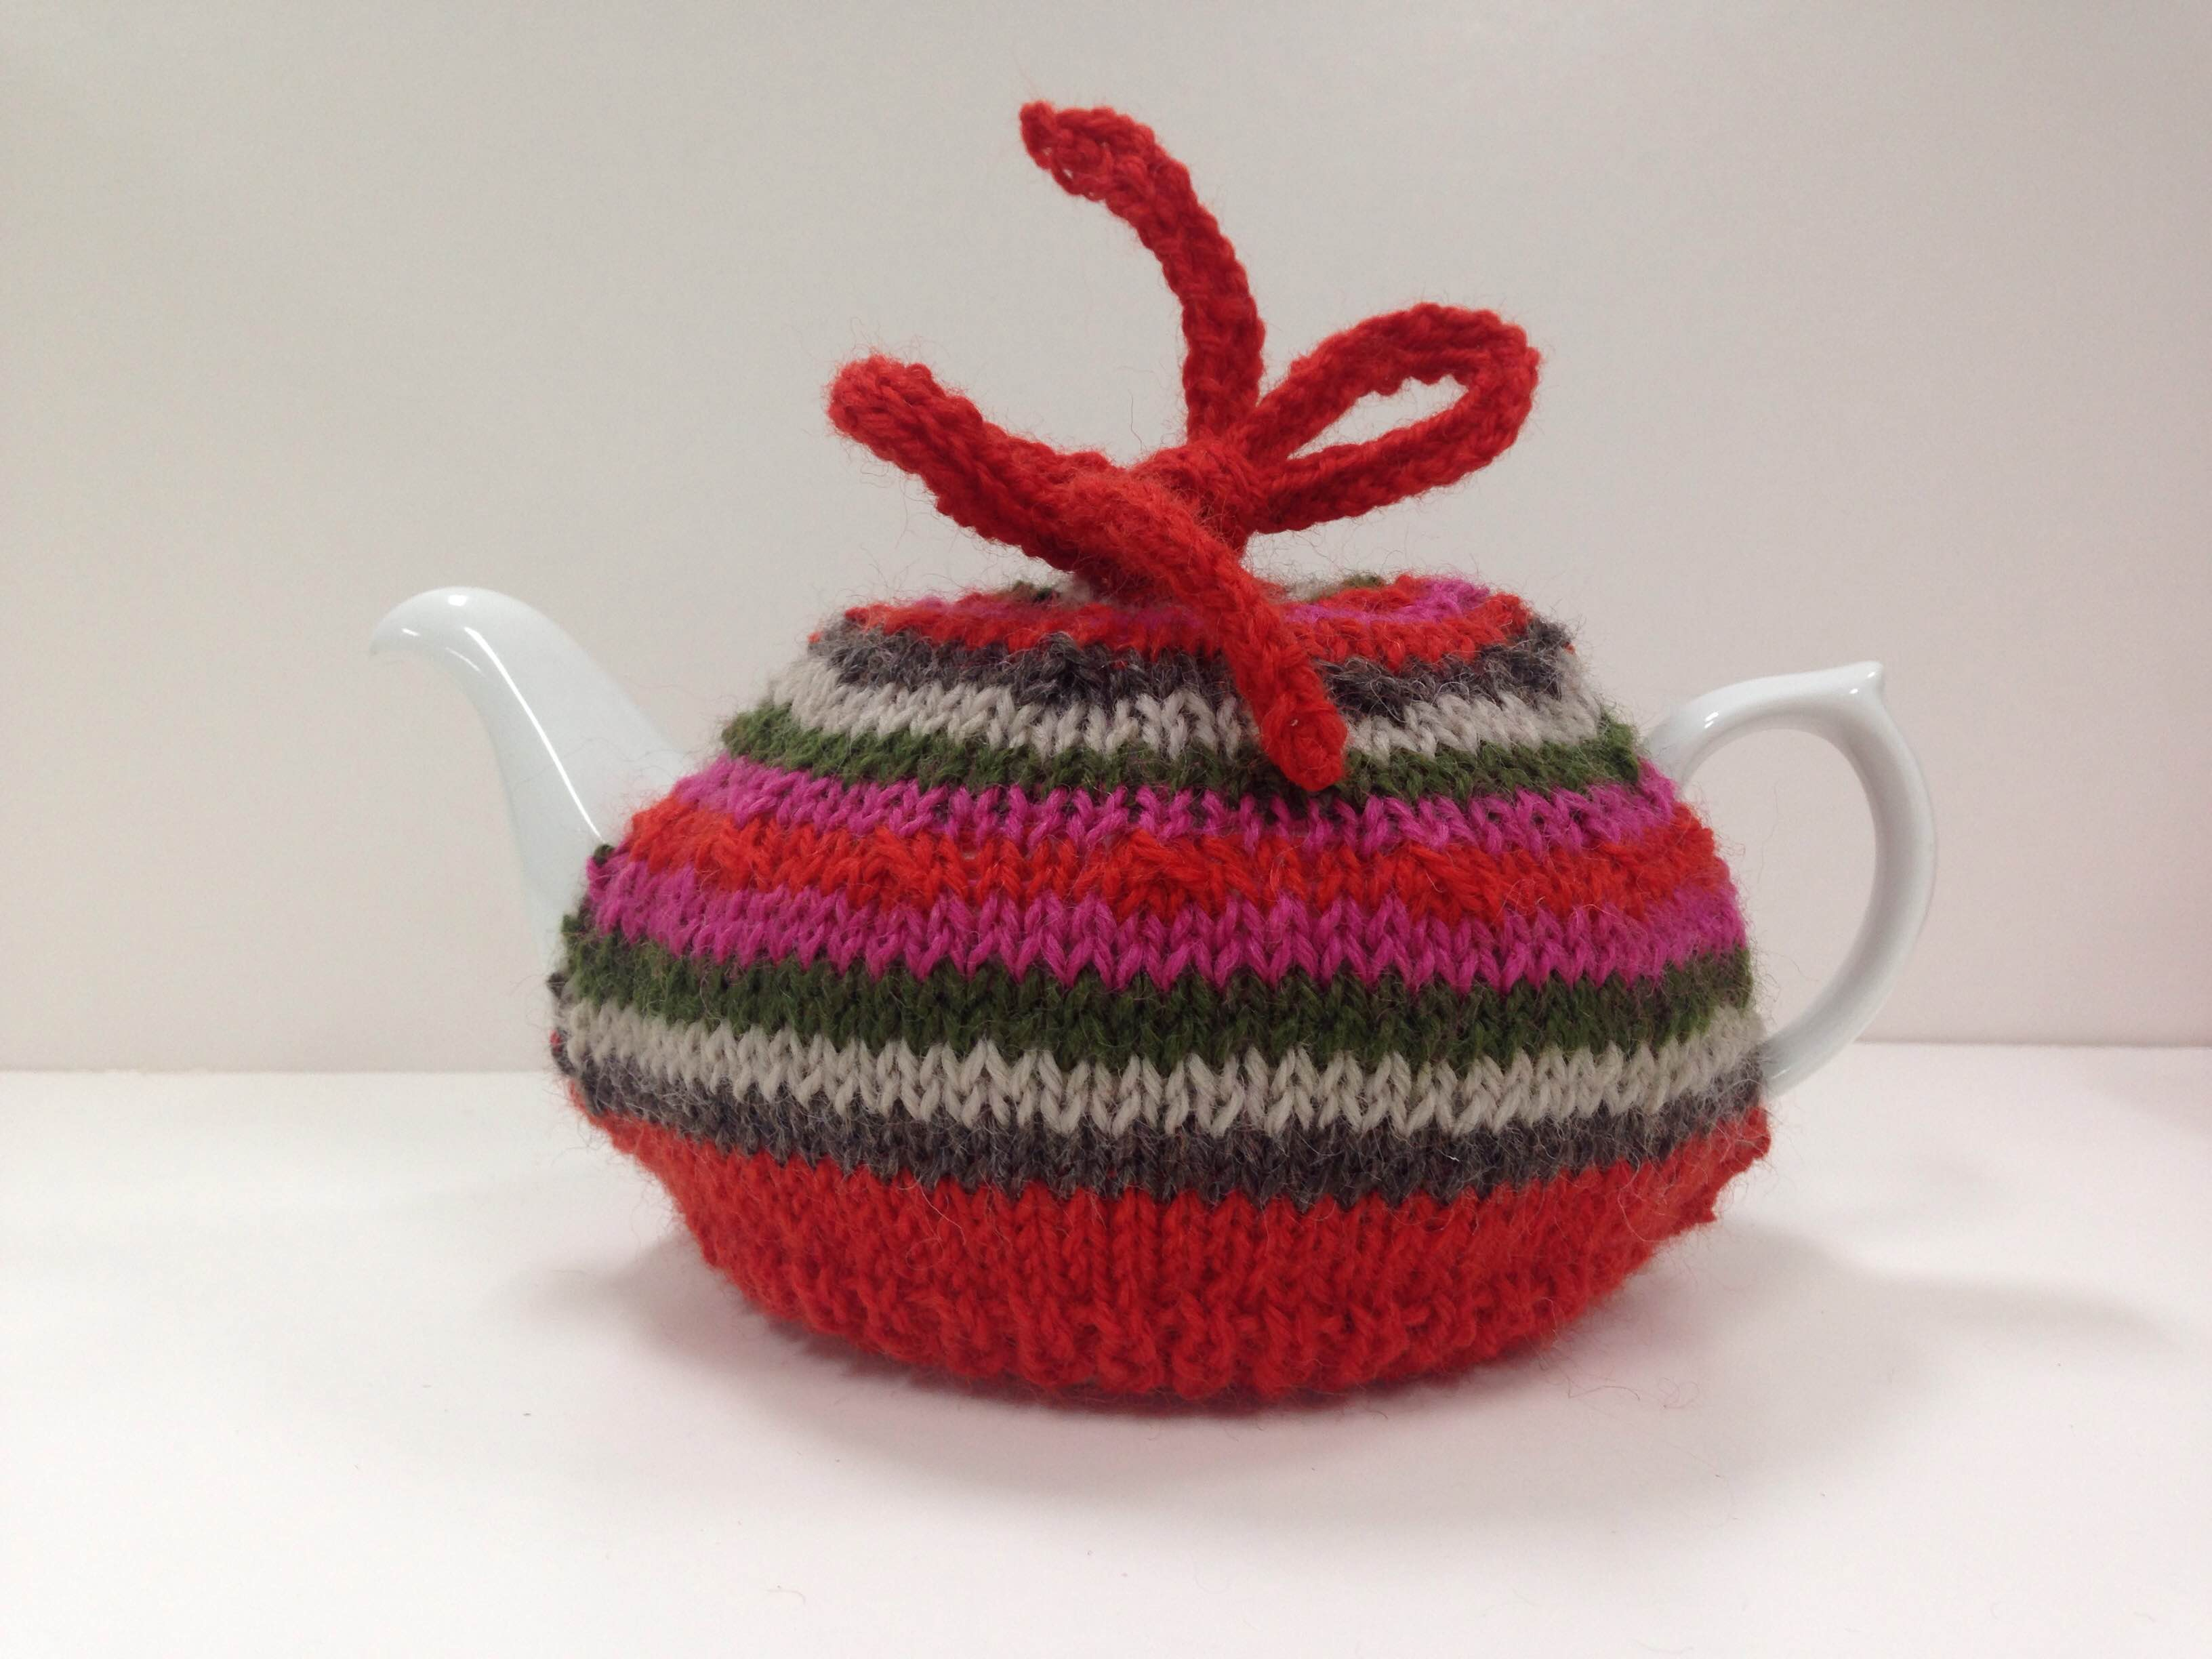 Tea Cosy Patterns To Knit Get Cosy Free Tea Cosy Pattern Lincraft Lincraft